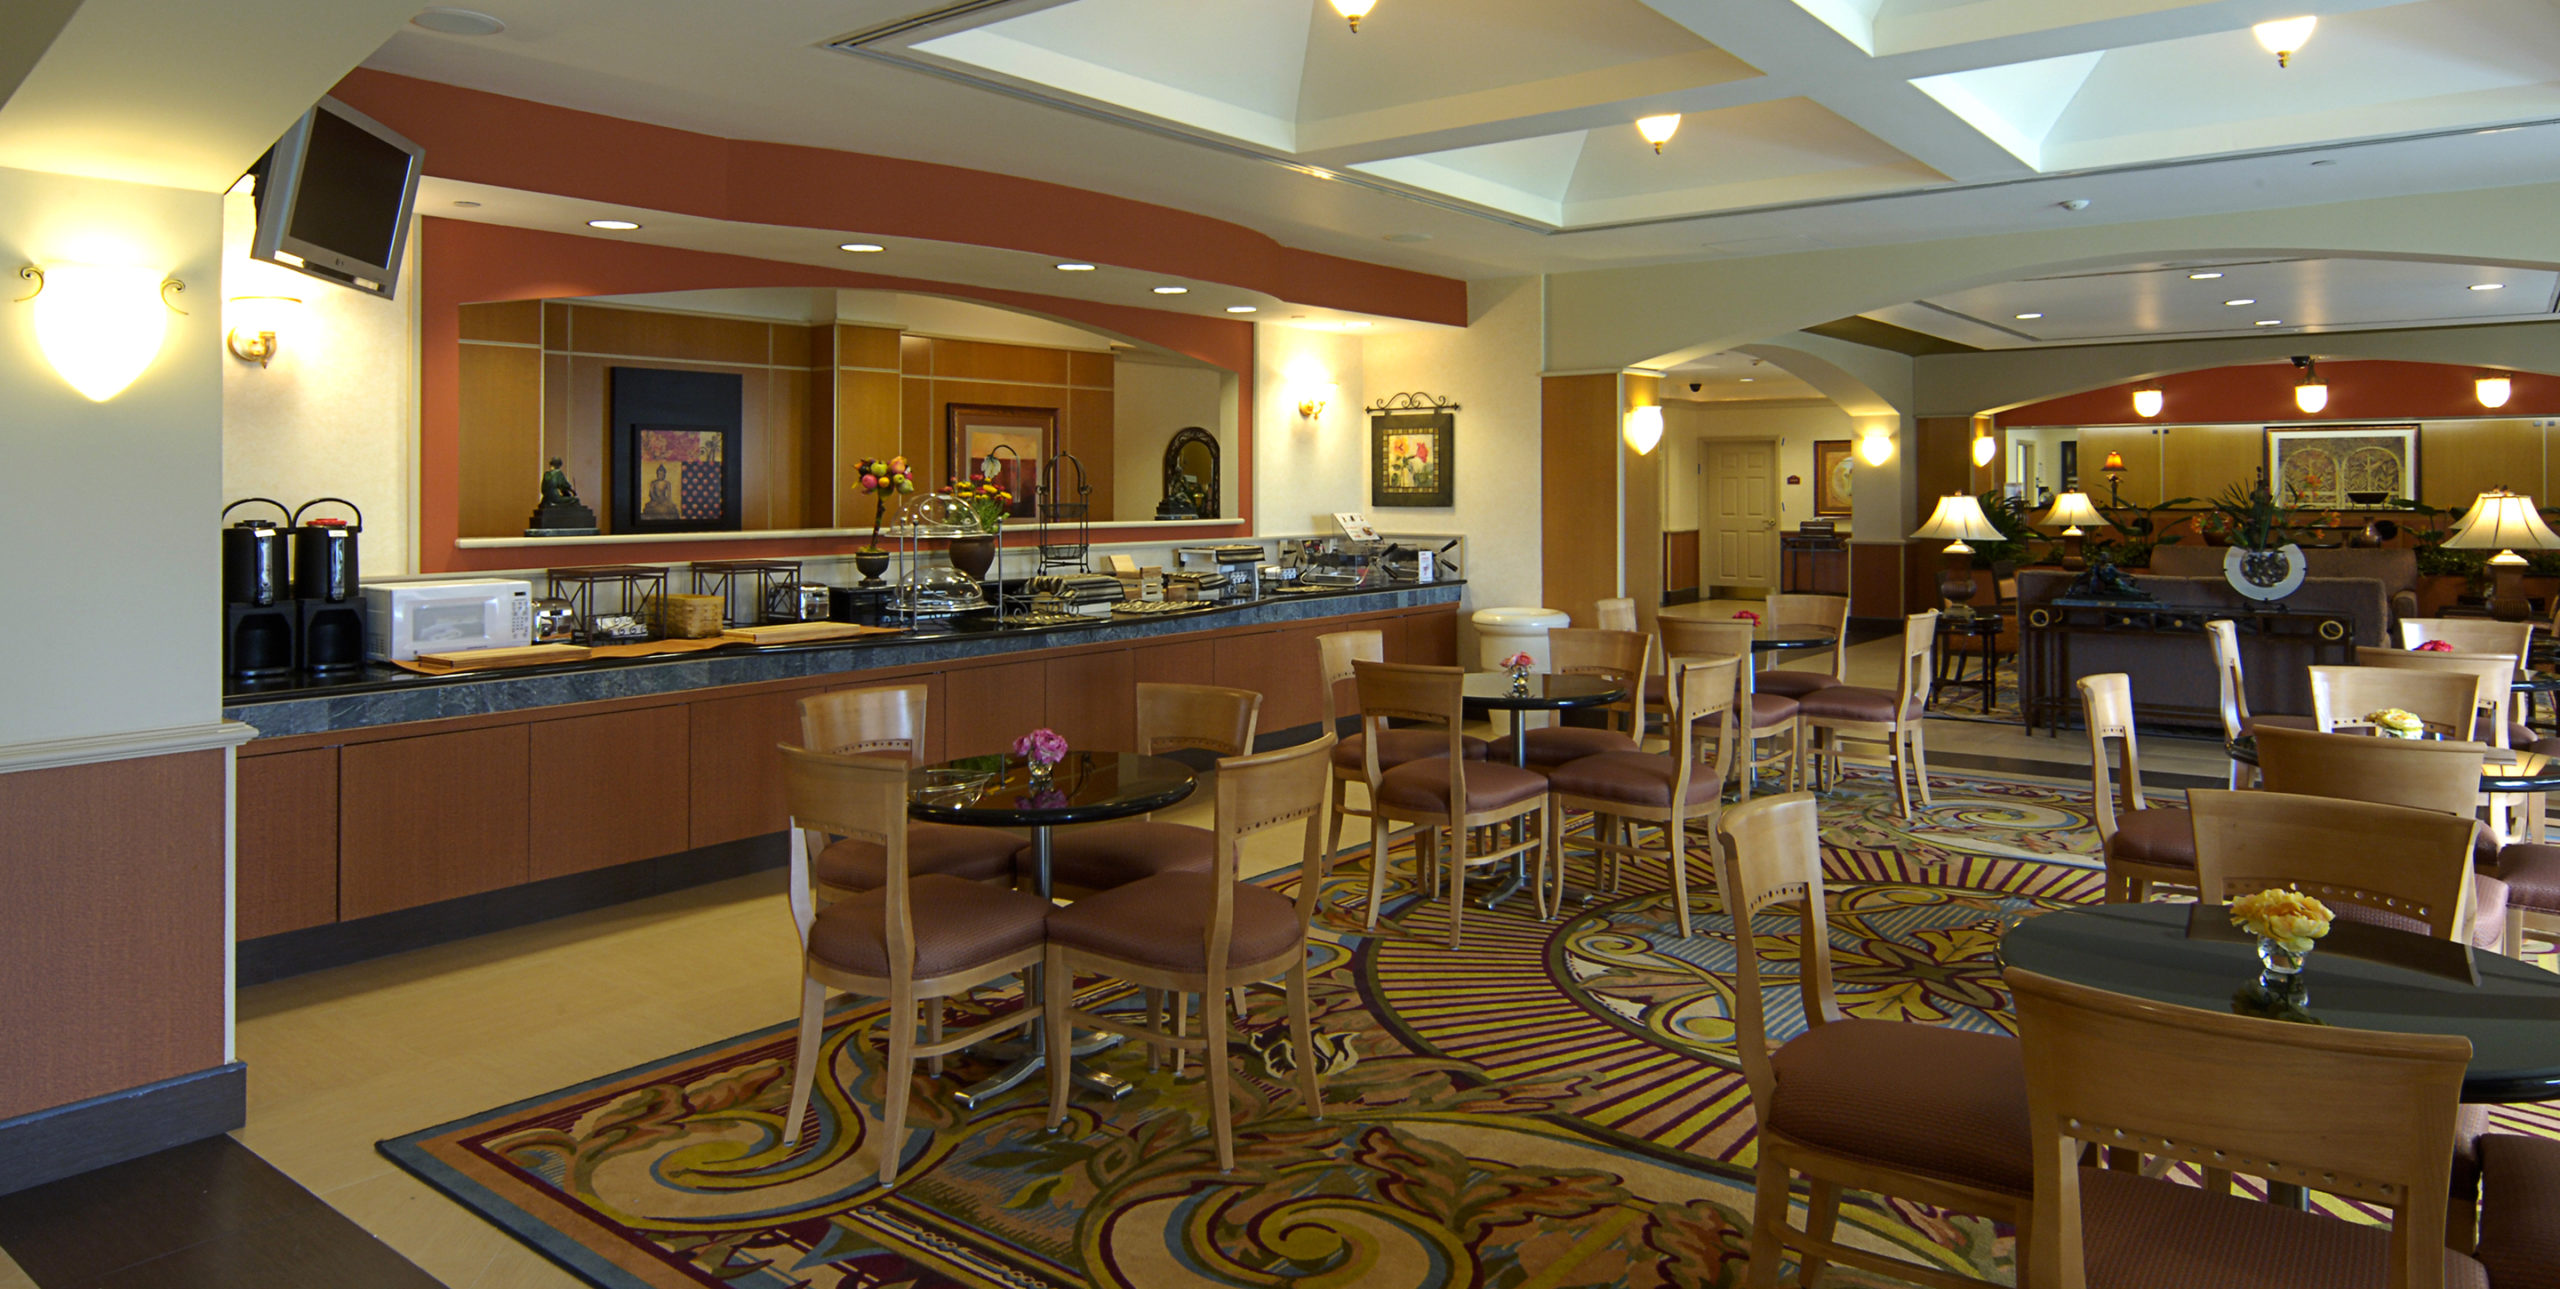 Dining room tables with four chairs at each table at La Quinta Inn and Suites by Wyndham Islip at 10 Aero Road, Bohemia